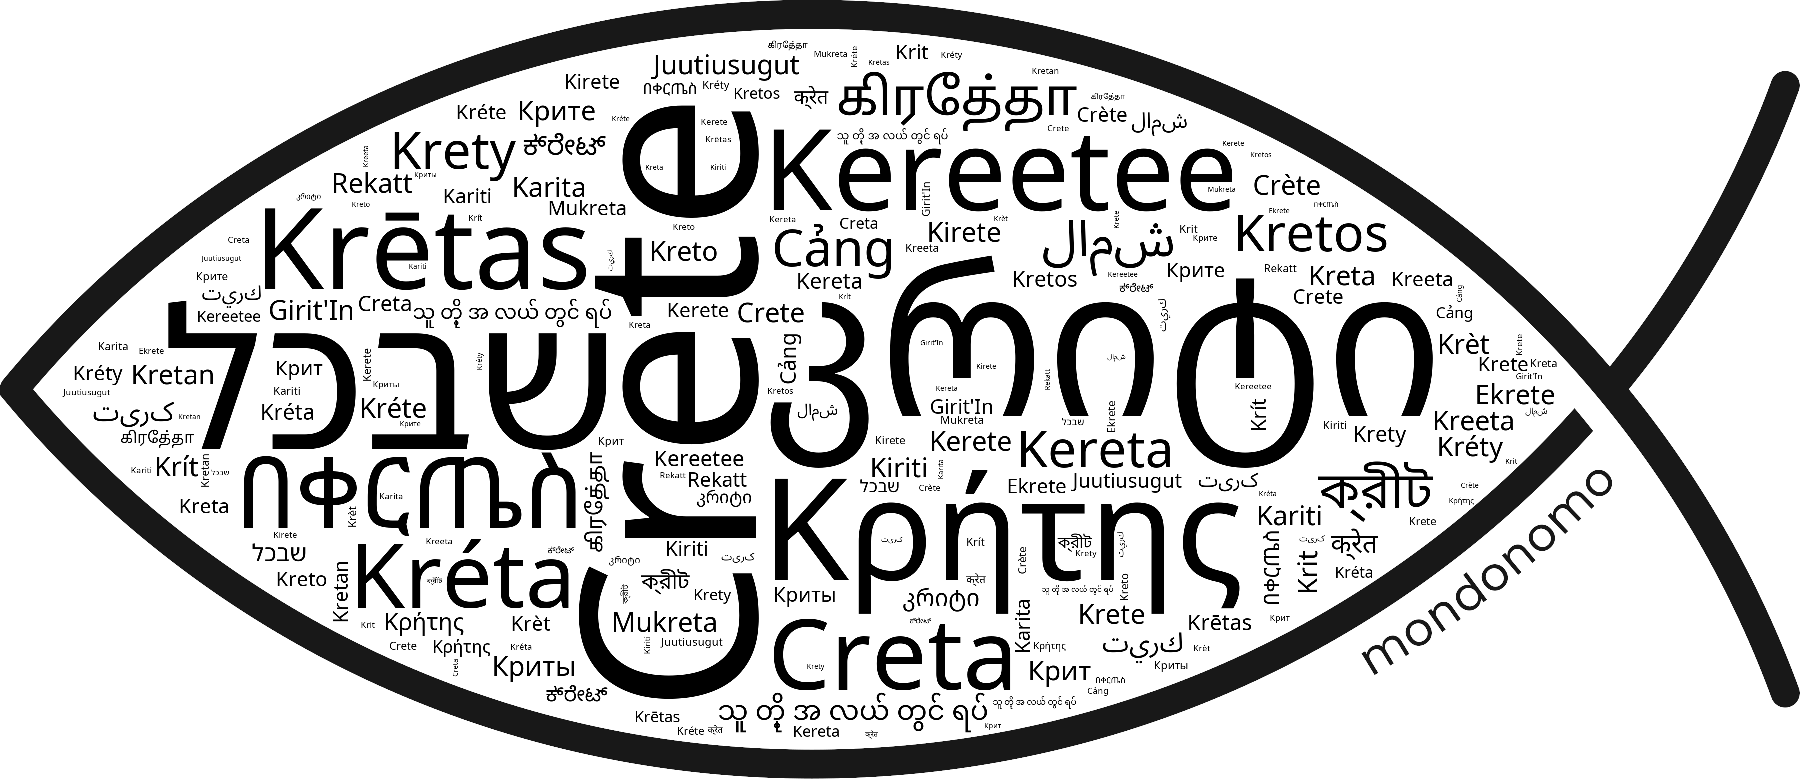 Name Crete in the world's Bibles